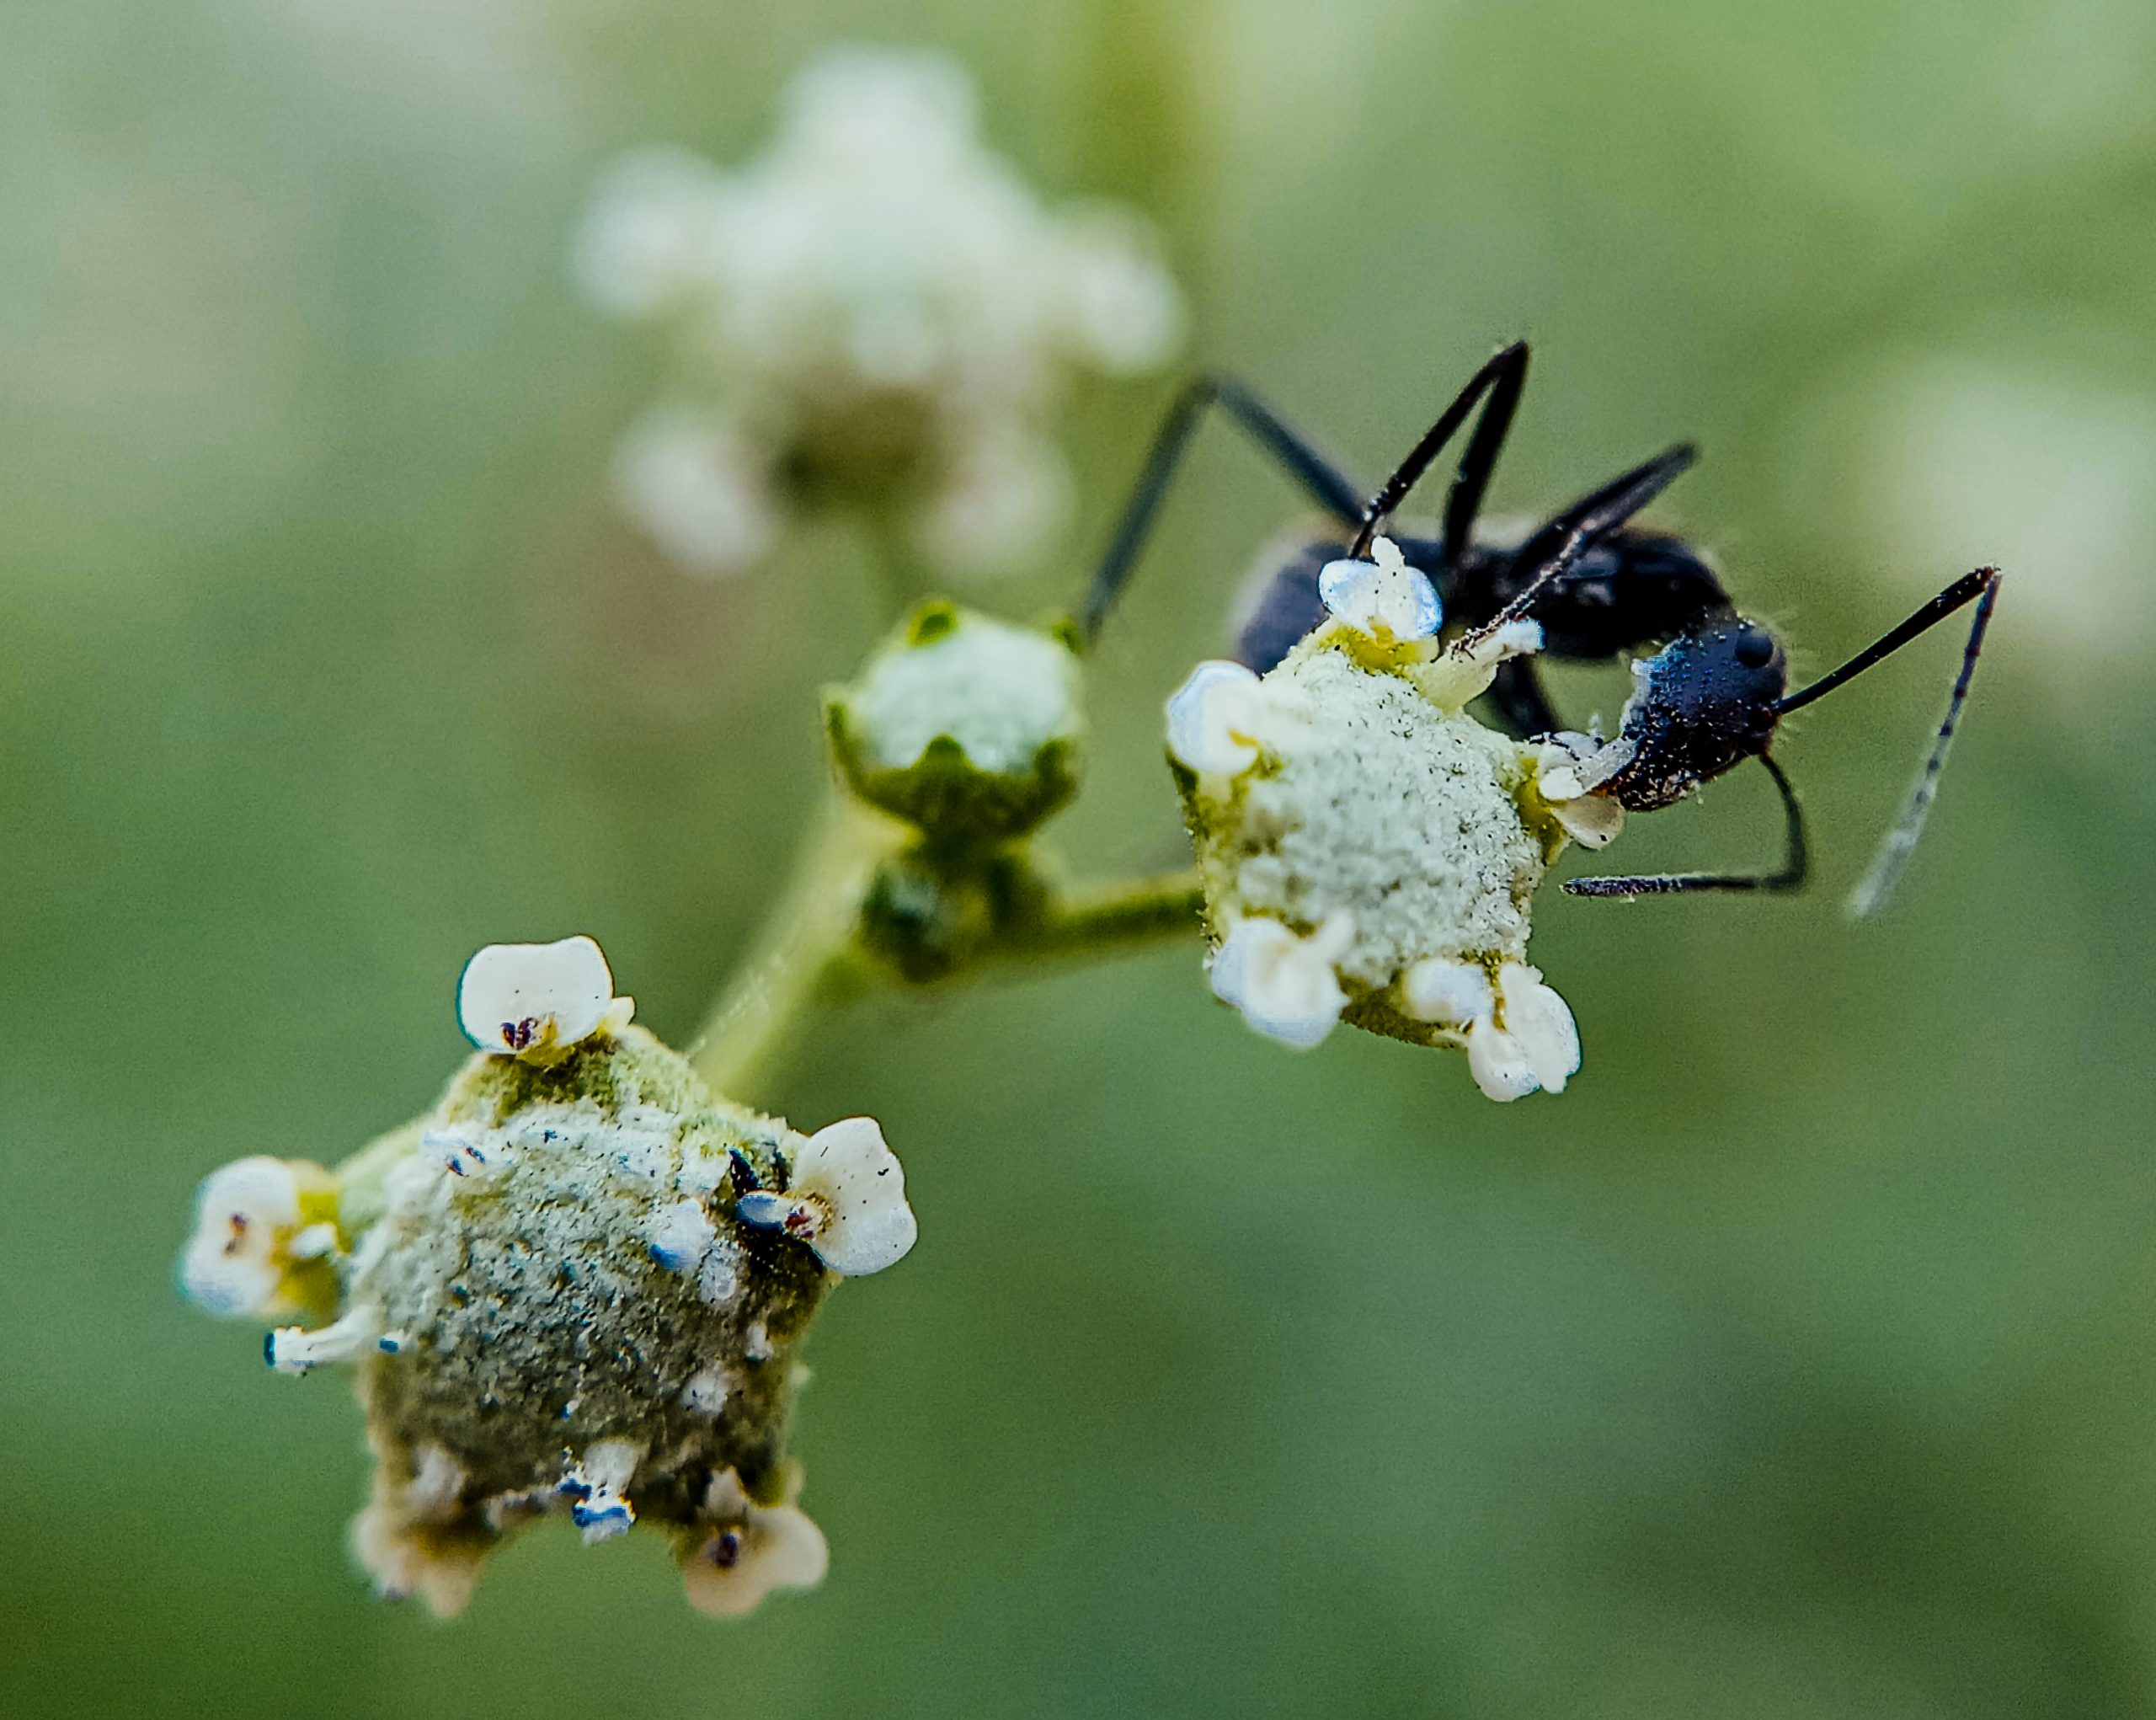 An ant on flower